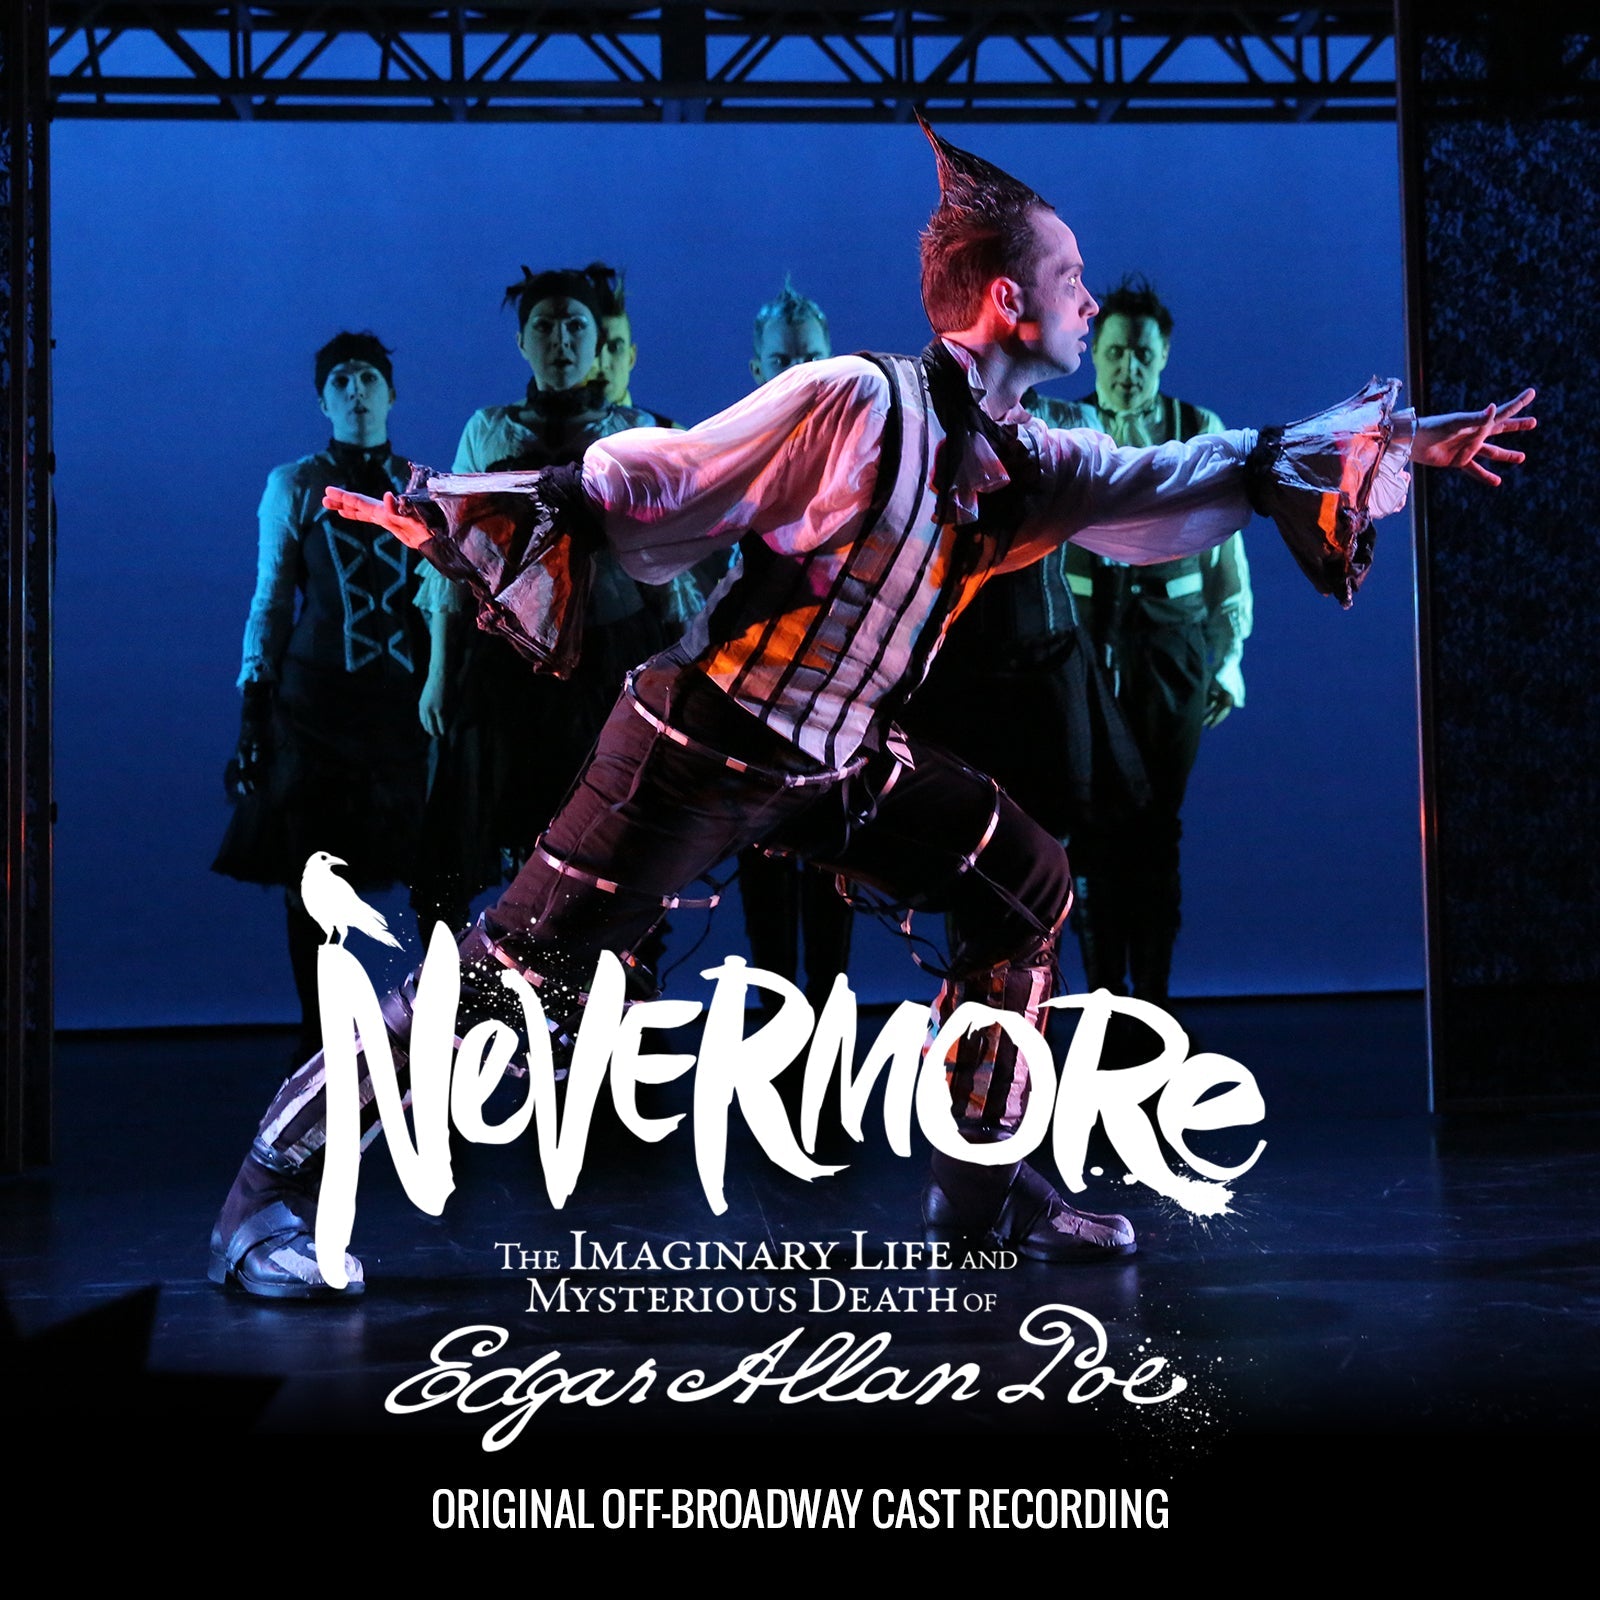 Nevermore - The Imaginary Life and Mysterious Death of Edgar Allan Poe (Original Off-Broadway Cast Recording) [MP3]